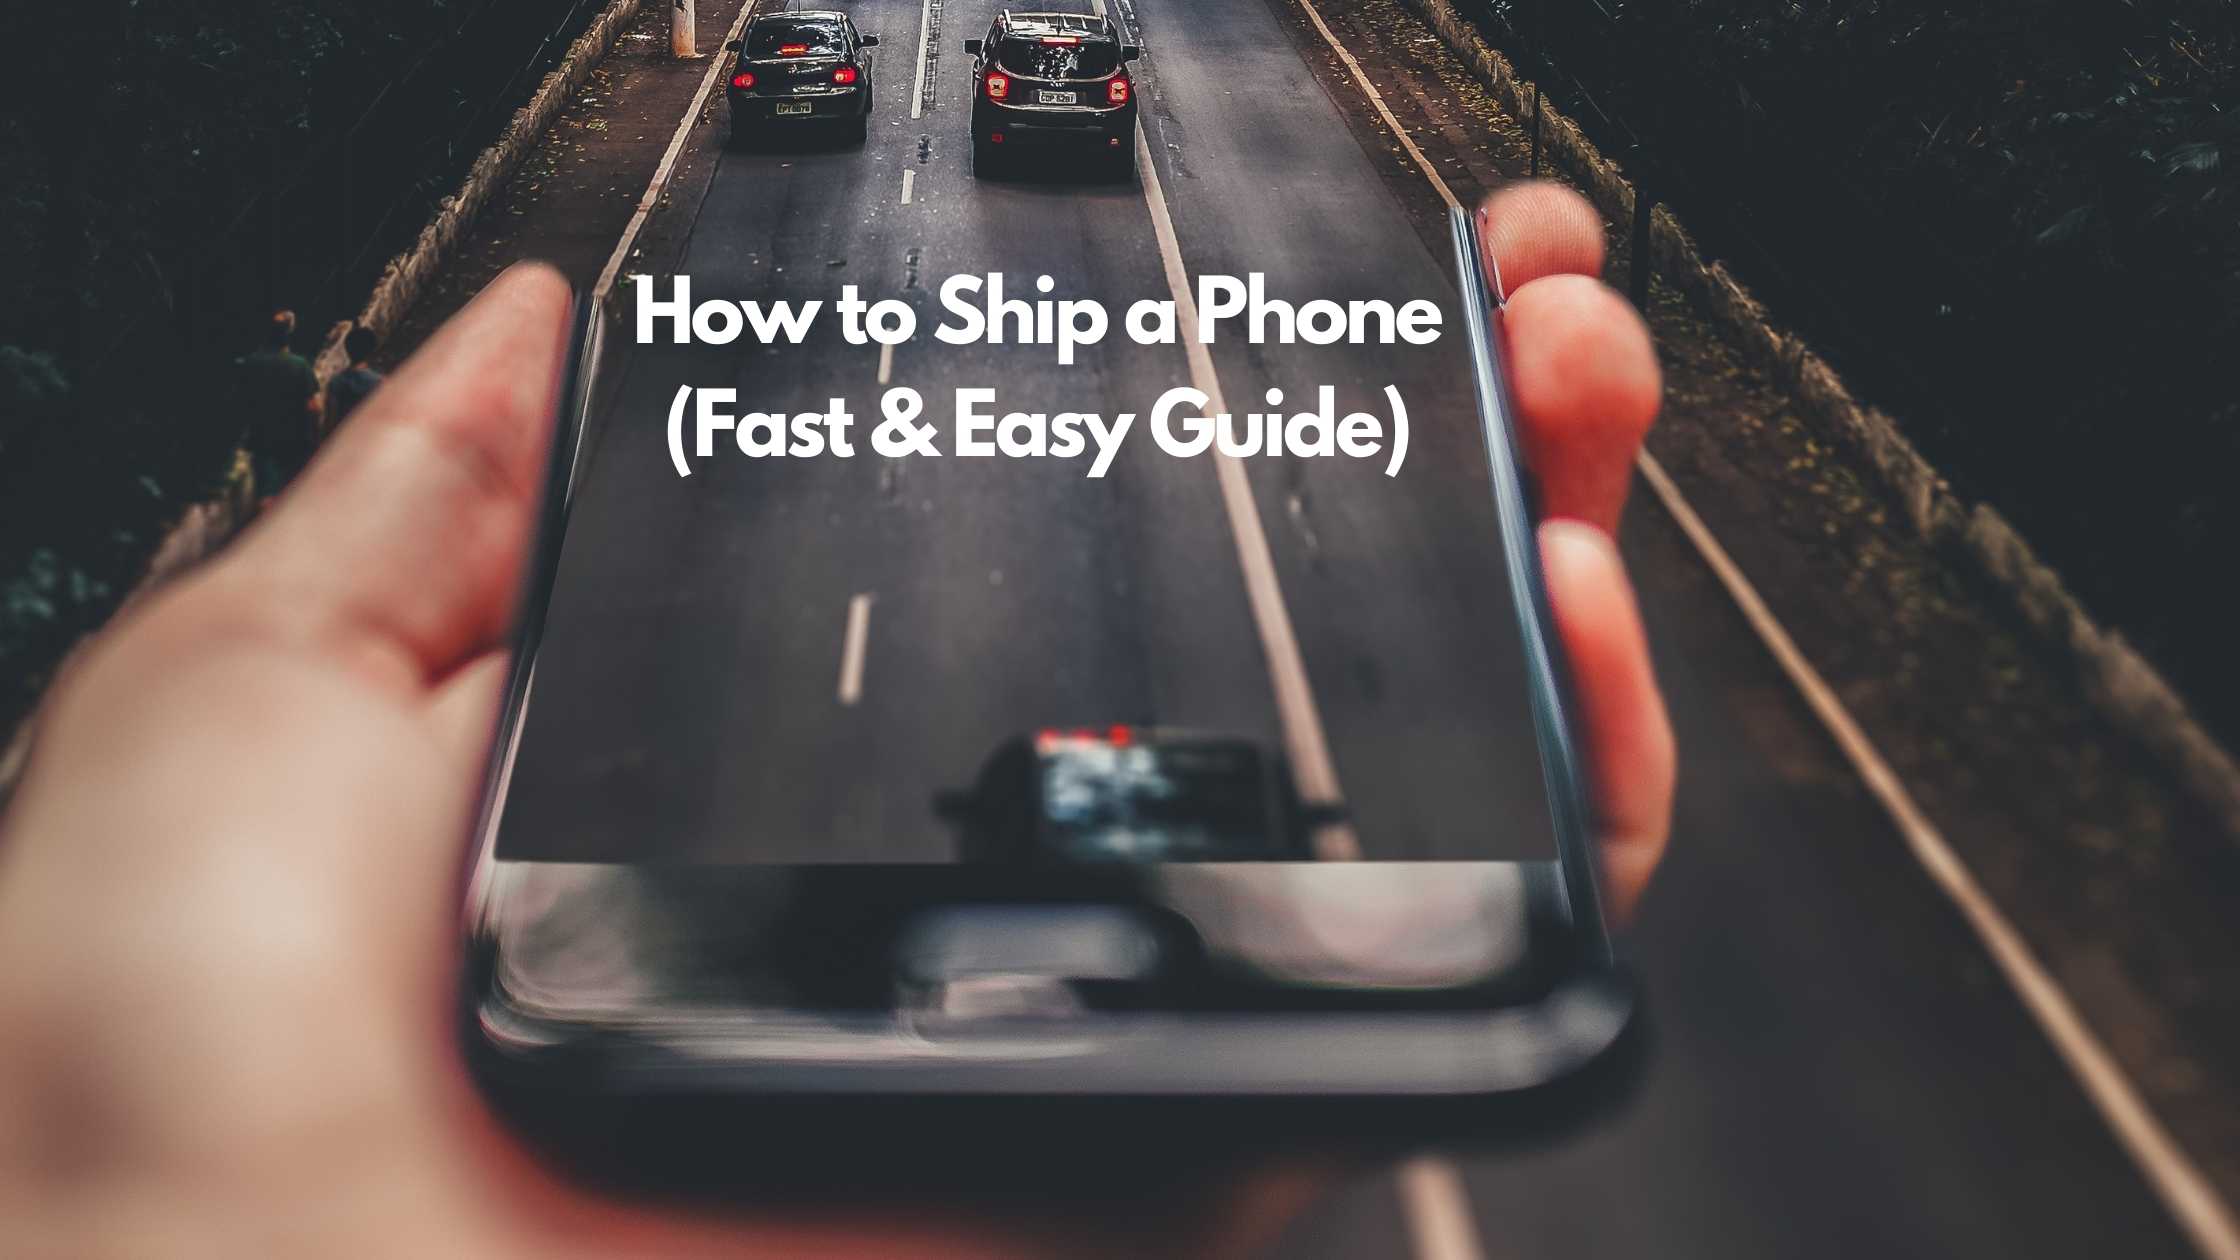 How To Ship A Phone Fast and Easy Guide